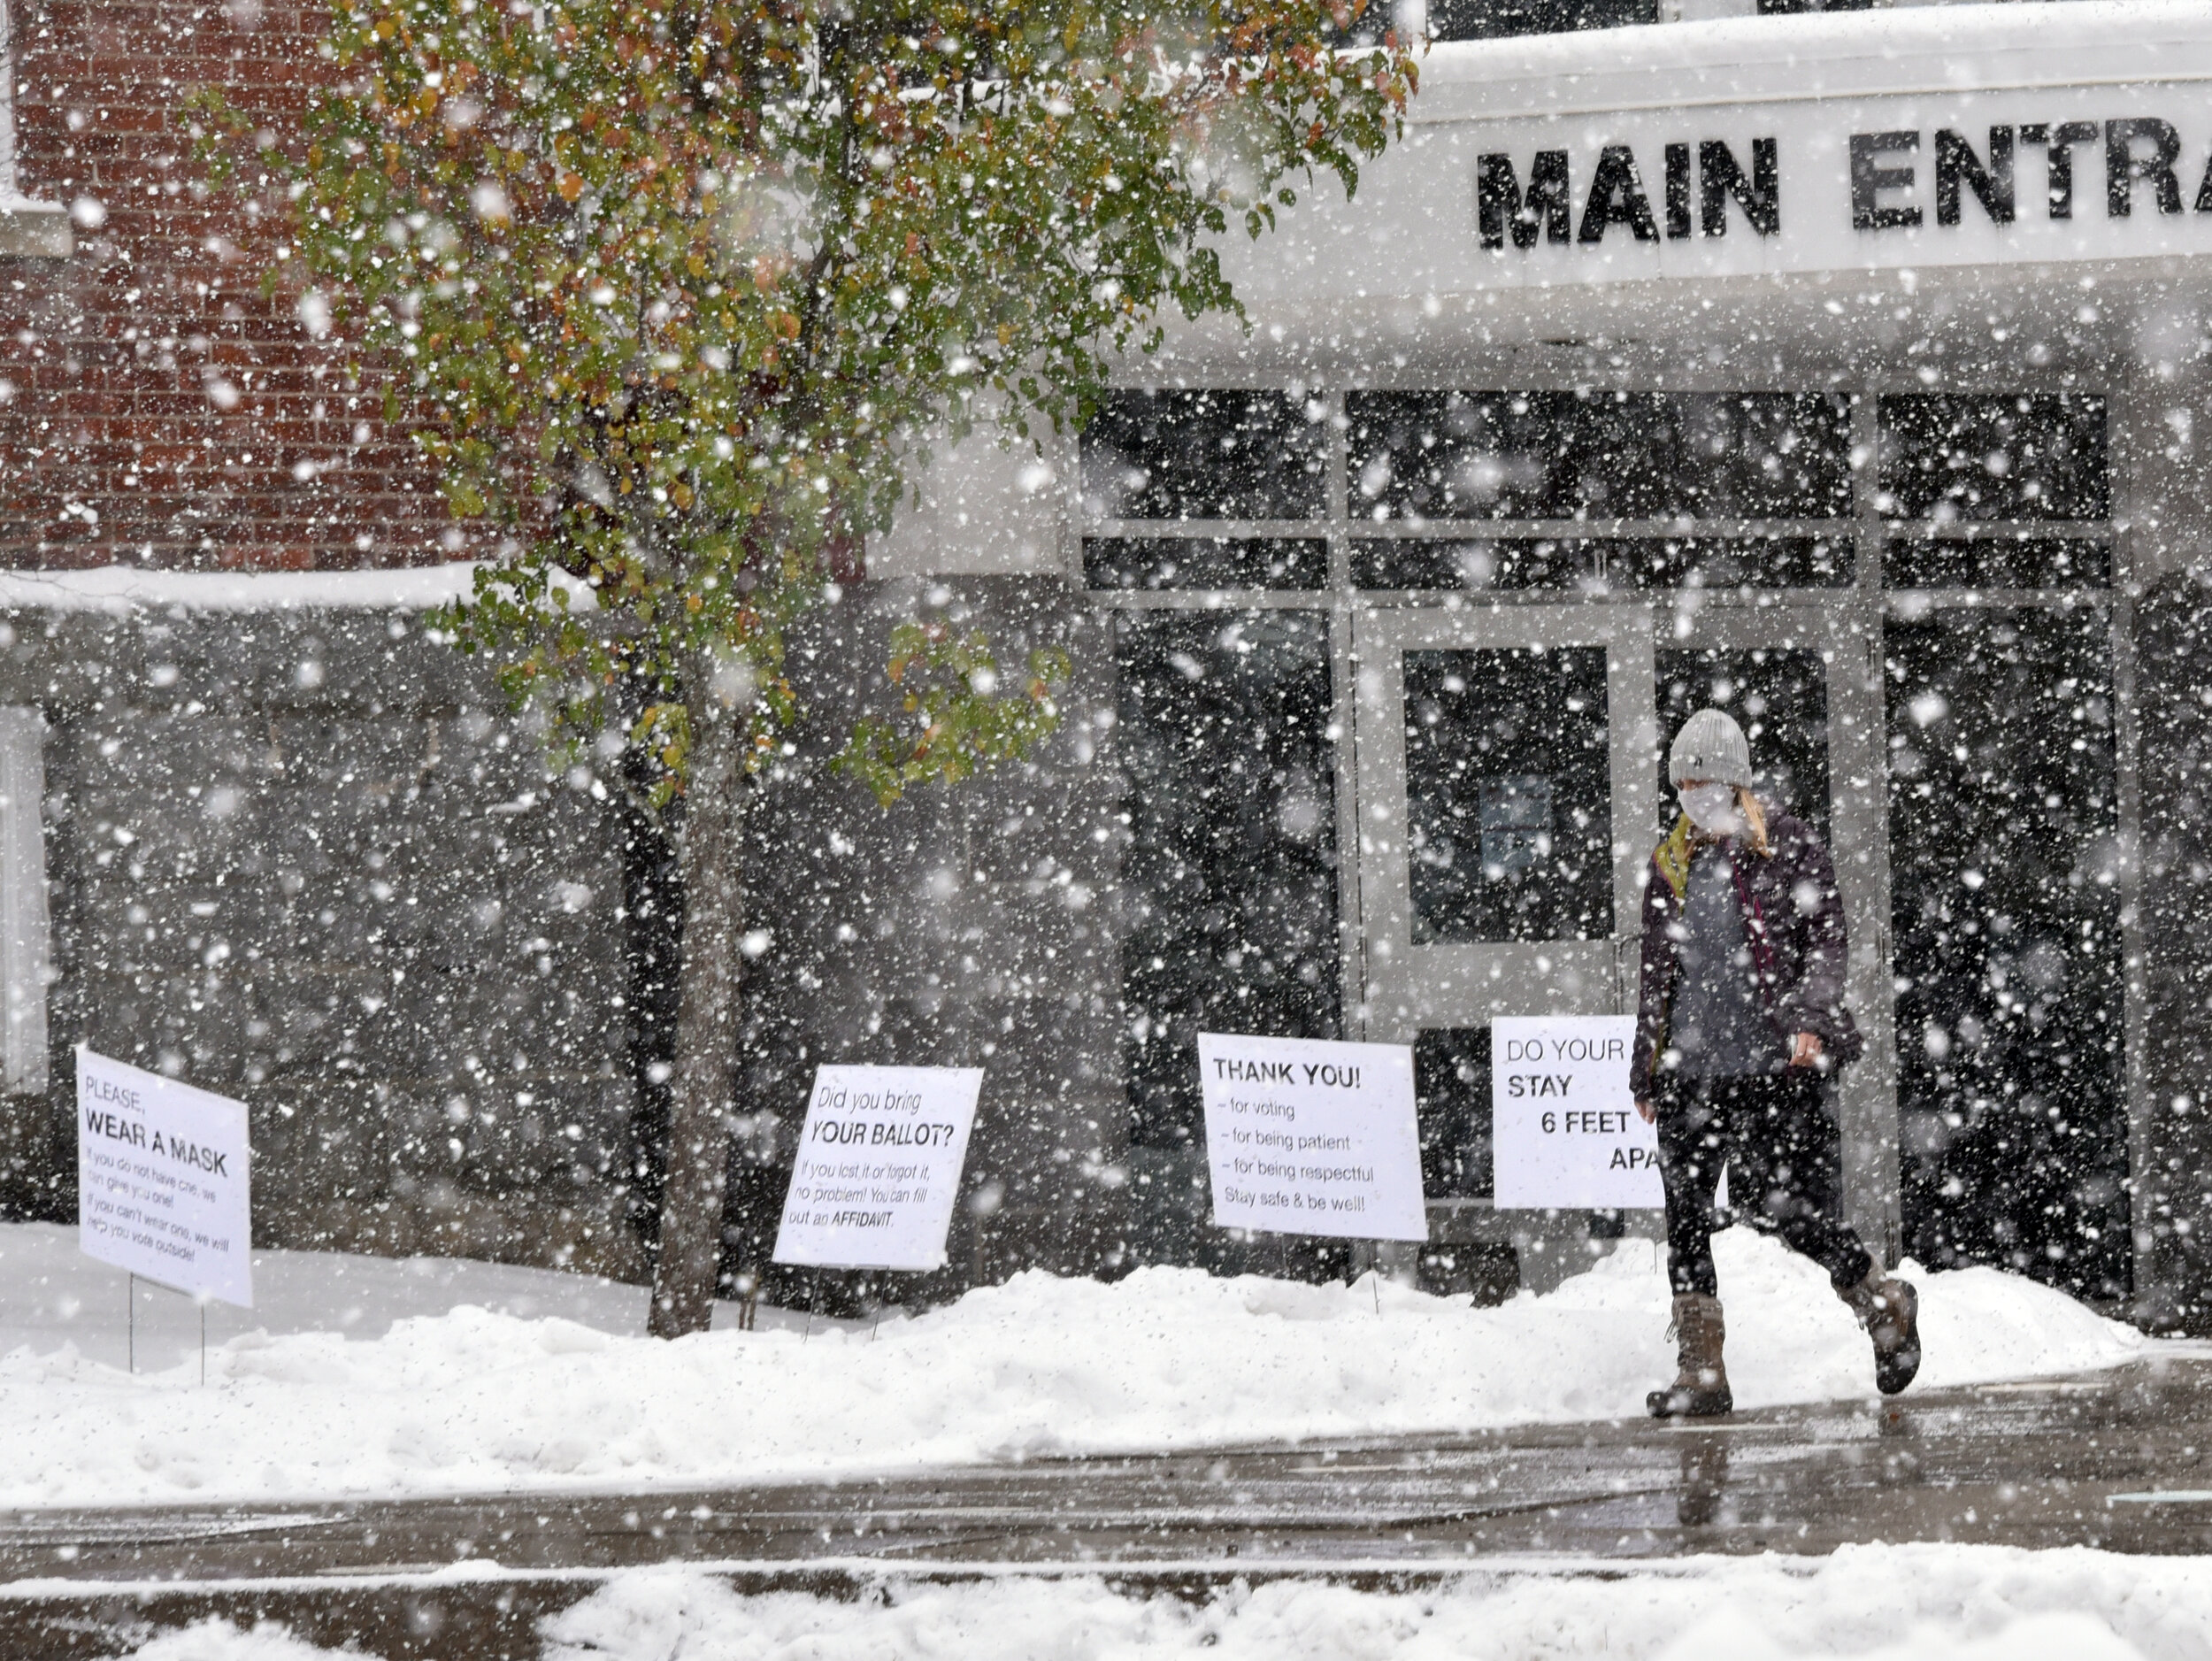   The season's first snowfall comes in time for Election Day. Photo by Gordon Miller.  